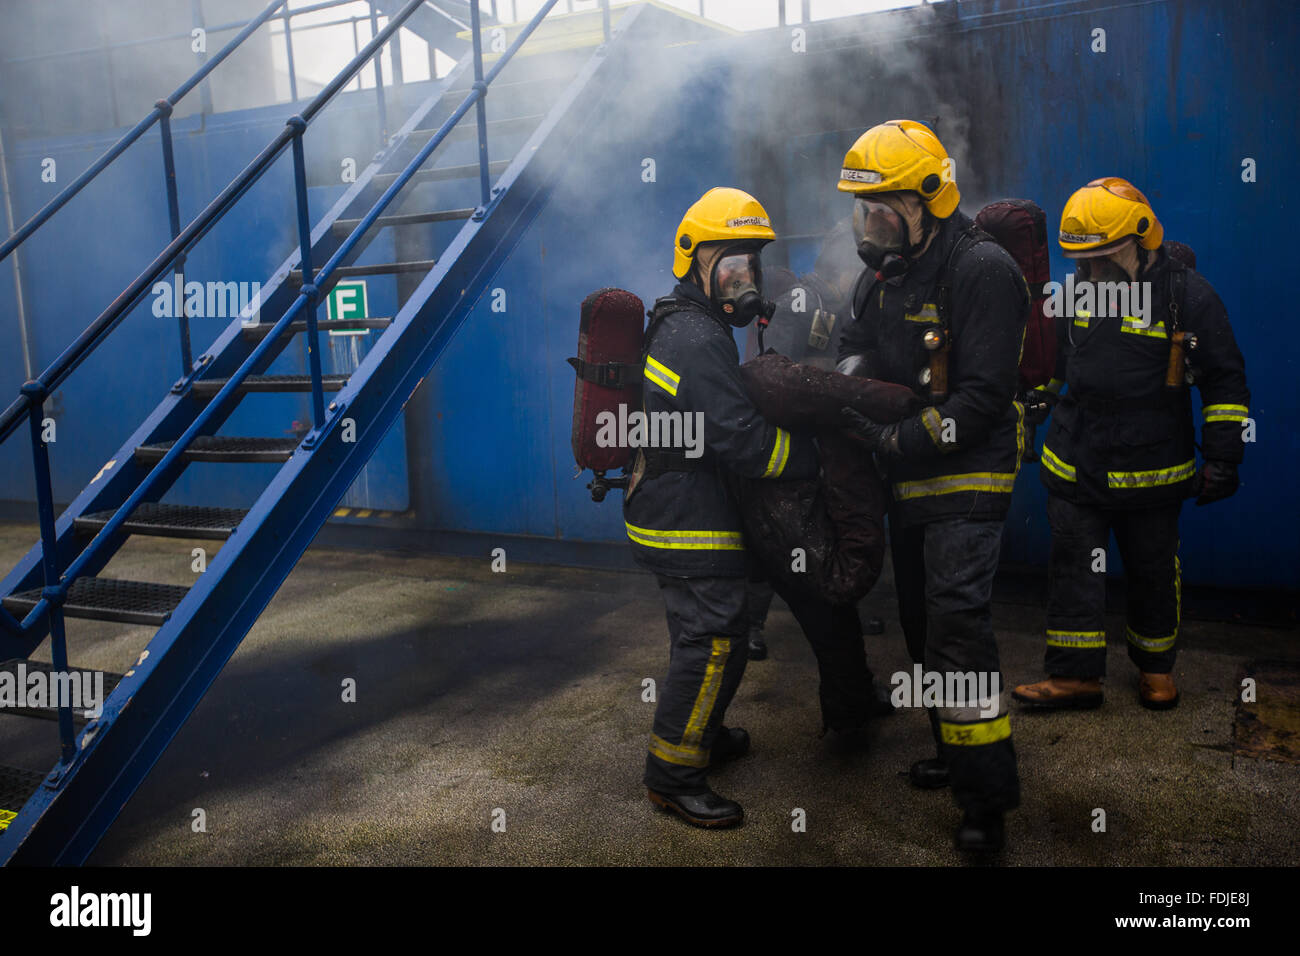 Seafarers and offshore workers retrieve a casualty during firefighting training Stock Photo